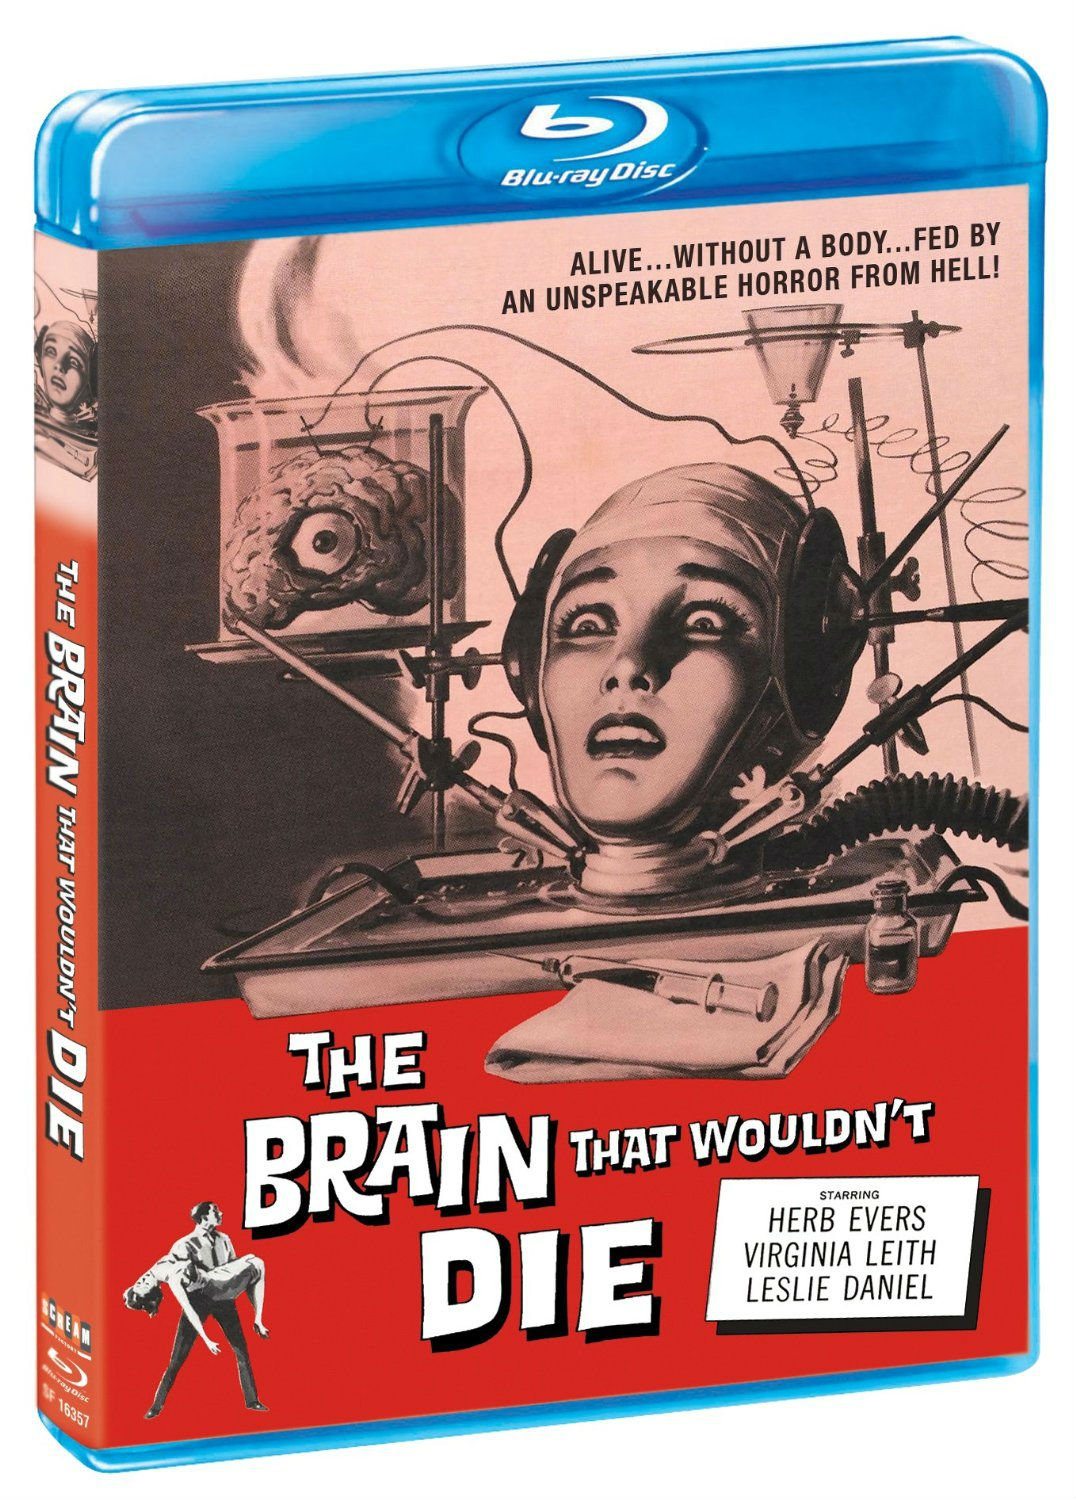 The Brain That Wouldn't Die (1962), Cult Classic Horror, Sci-Fi